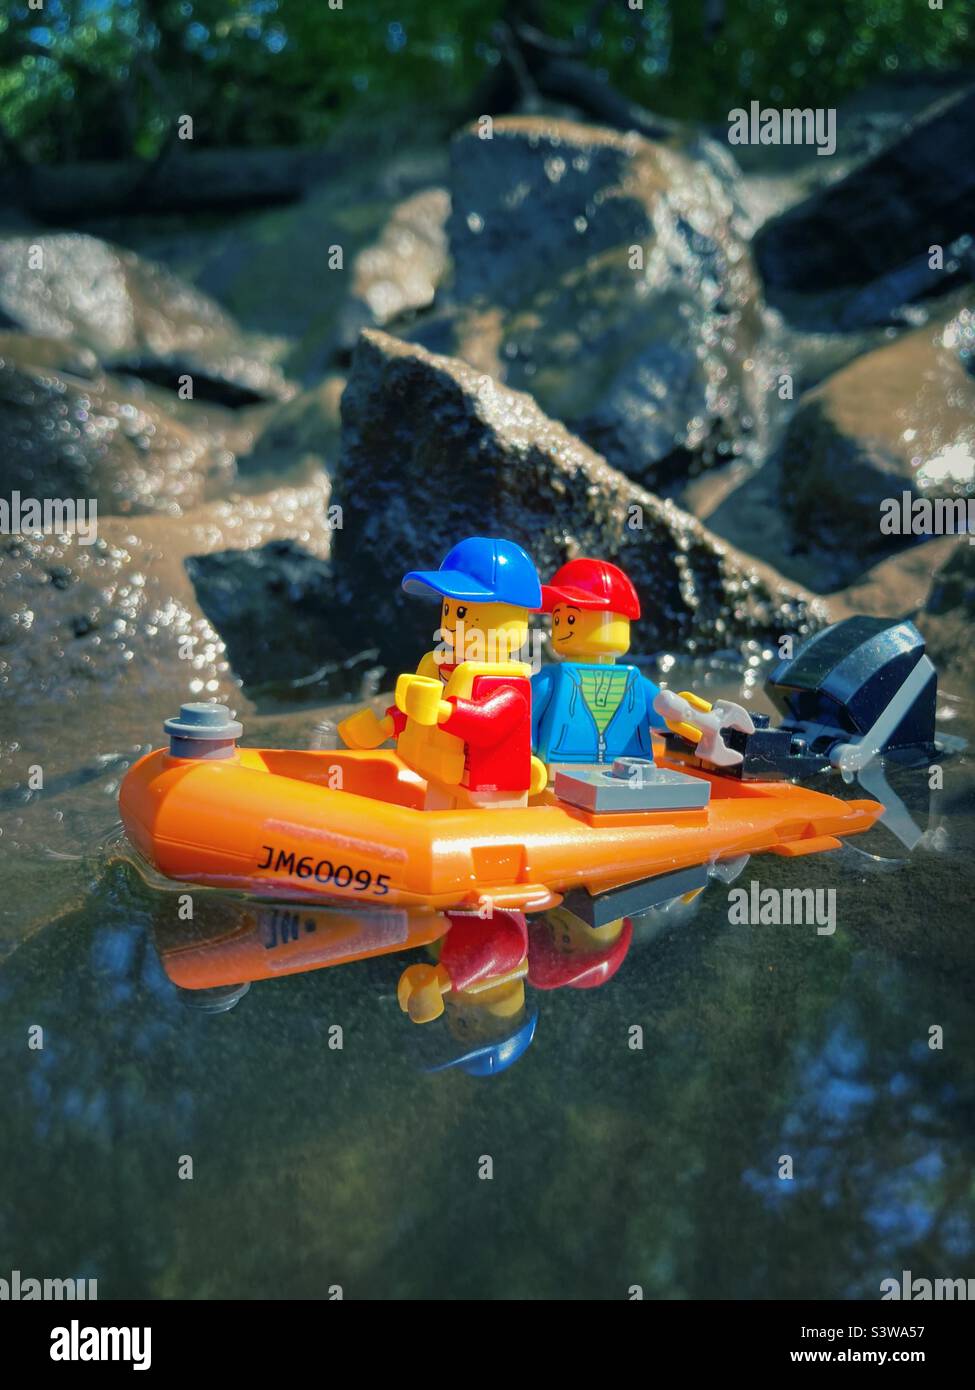 Lego figures in a red Rubber dinghy with outboard engine on muddy Water Stock Photo